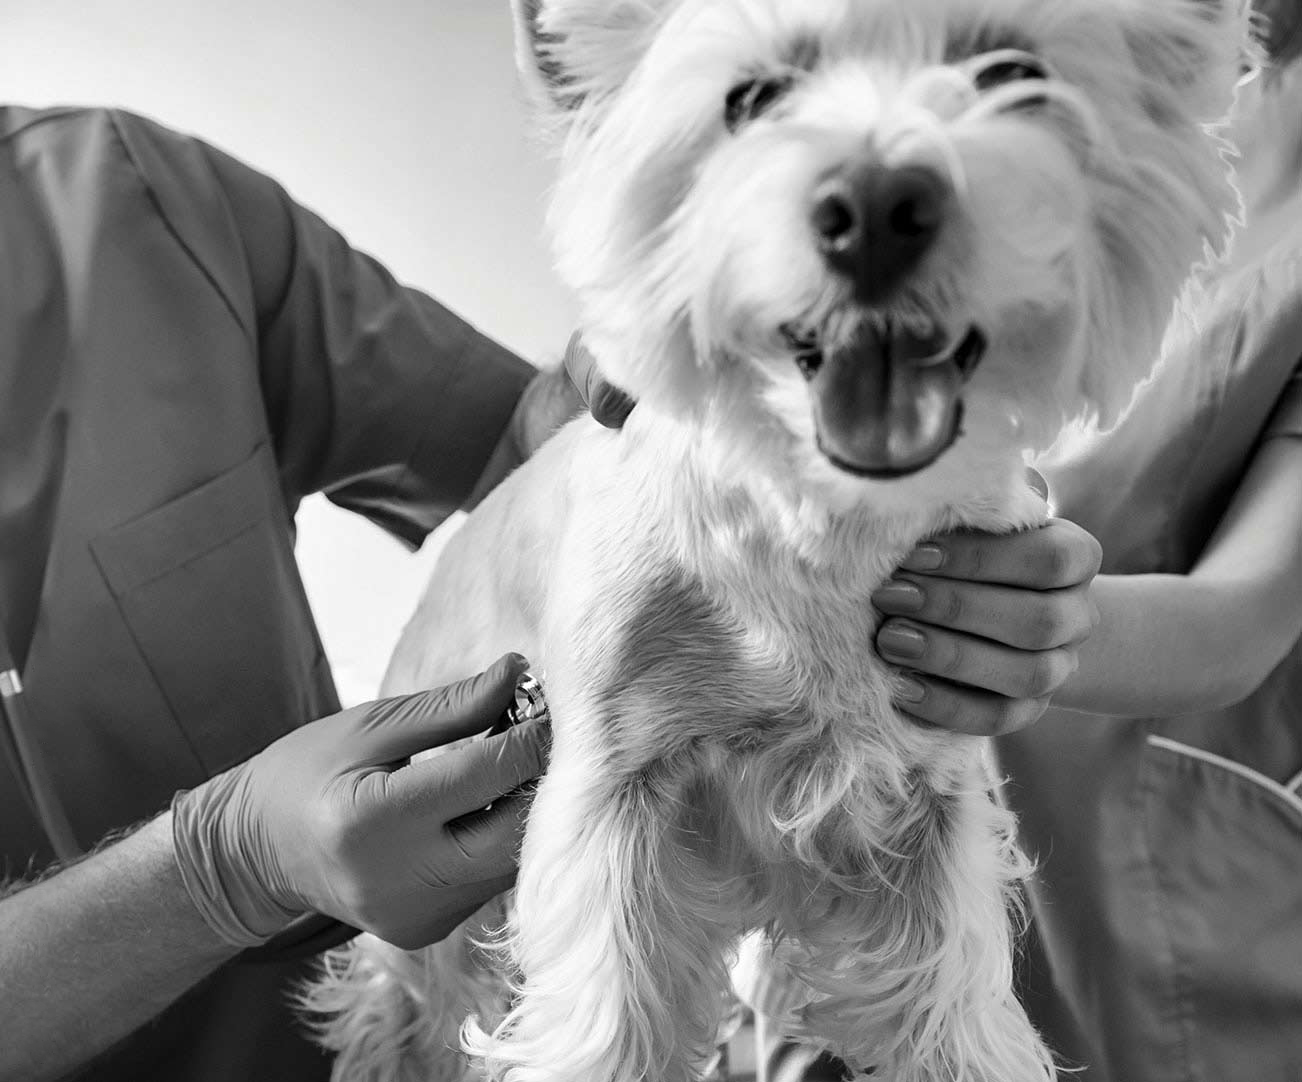 West highland white terrier being examined with a stethoscope.